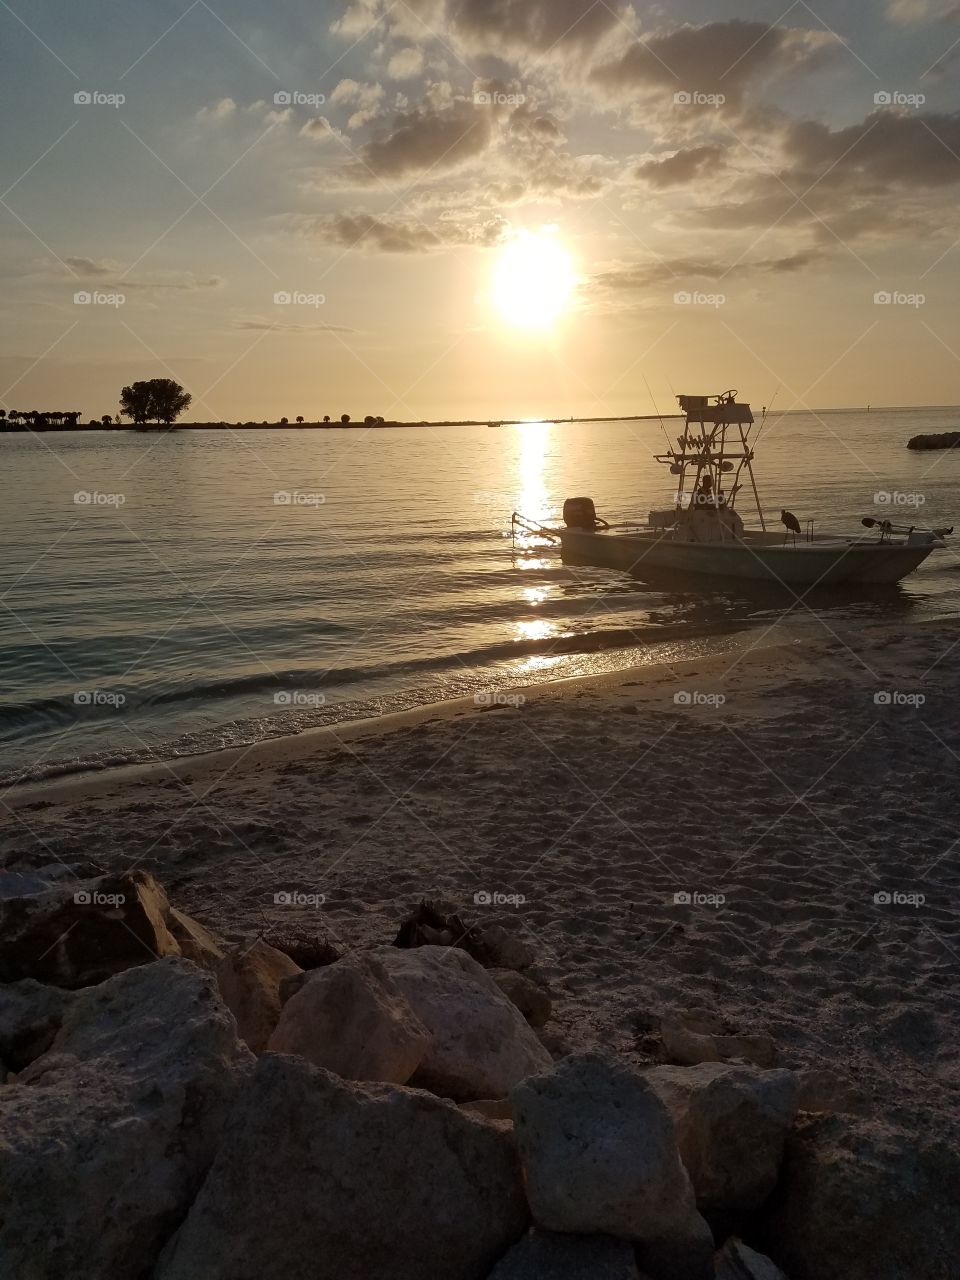 beach sunset with boat